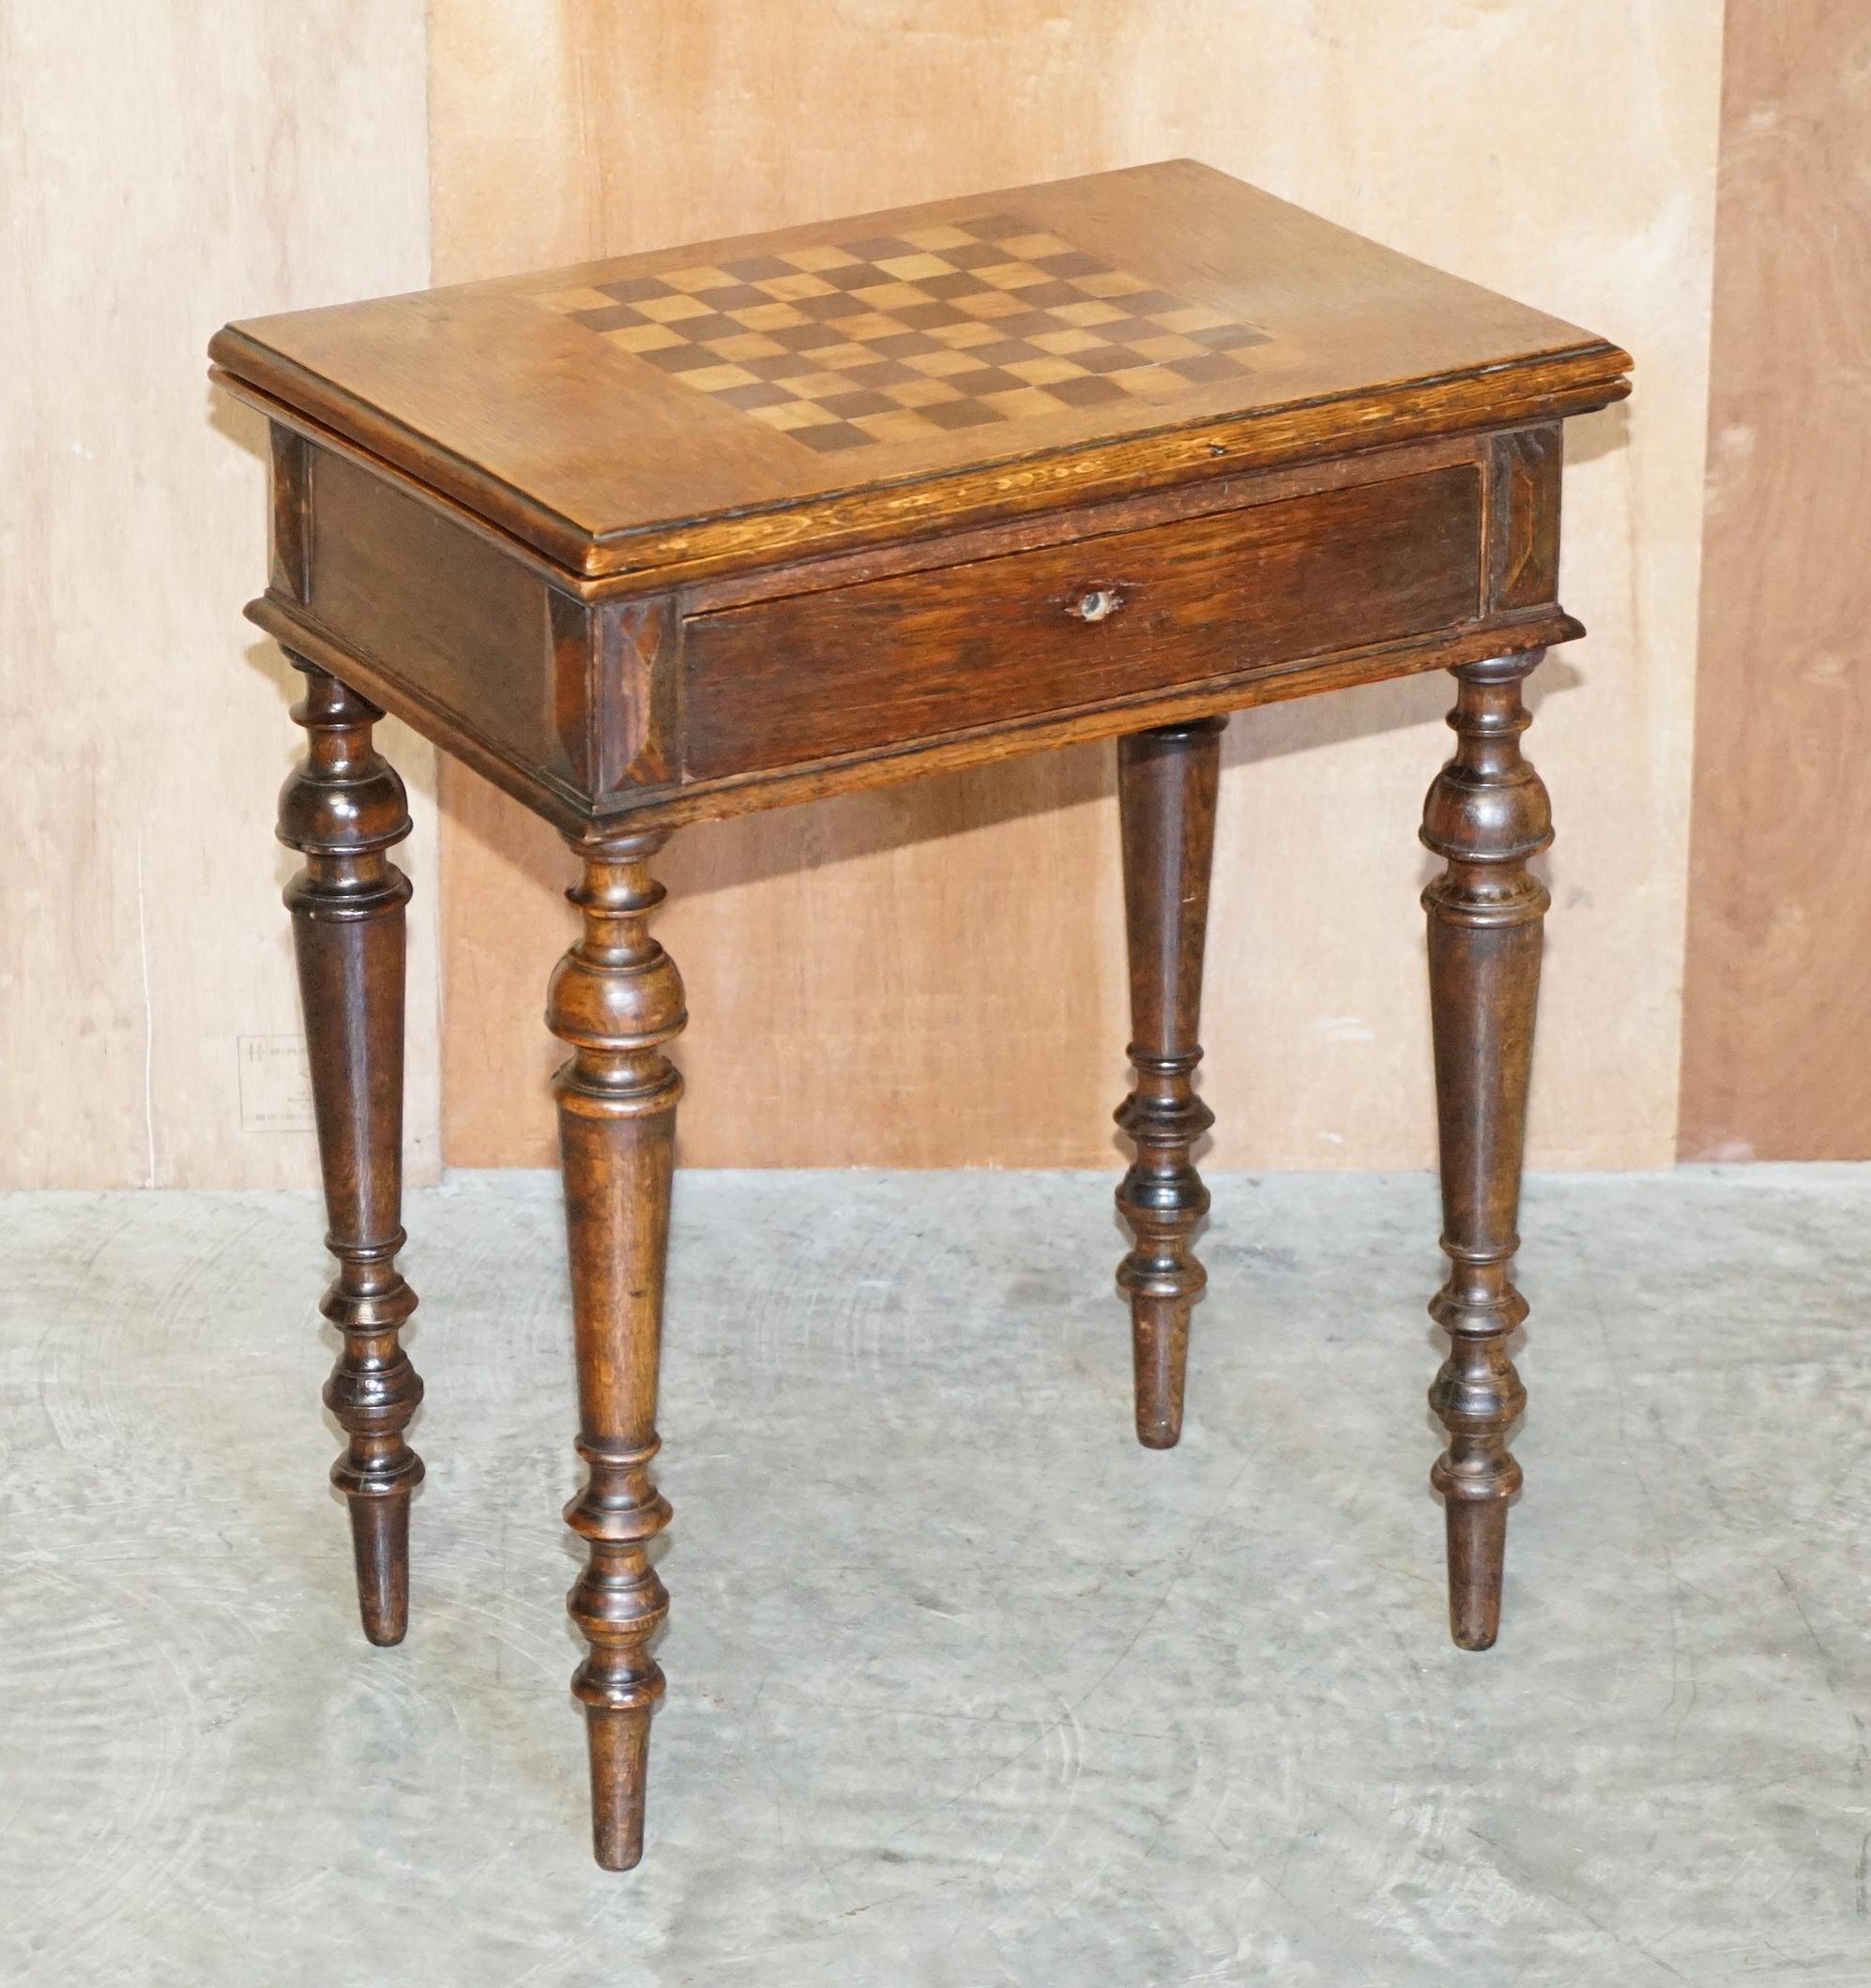 We are delighted to offer this very nice antique Victorian English oak chess table with fold over card table top

A good looking and well made piece, as you can see the main top is for chess or checkers, you have a fold over top which has the